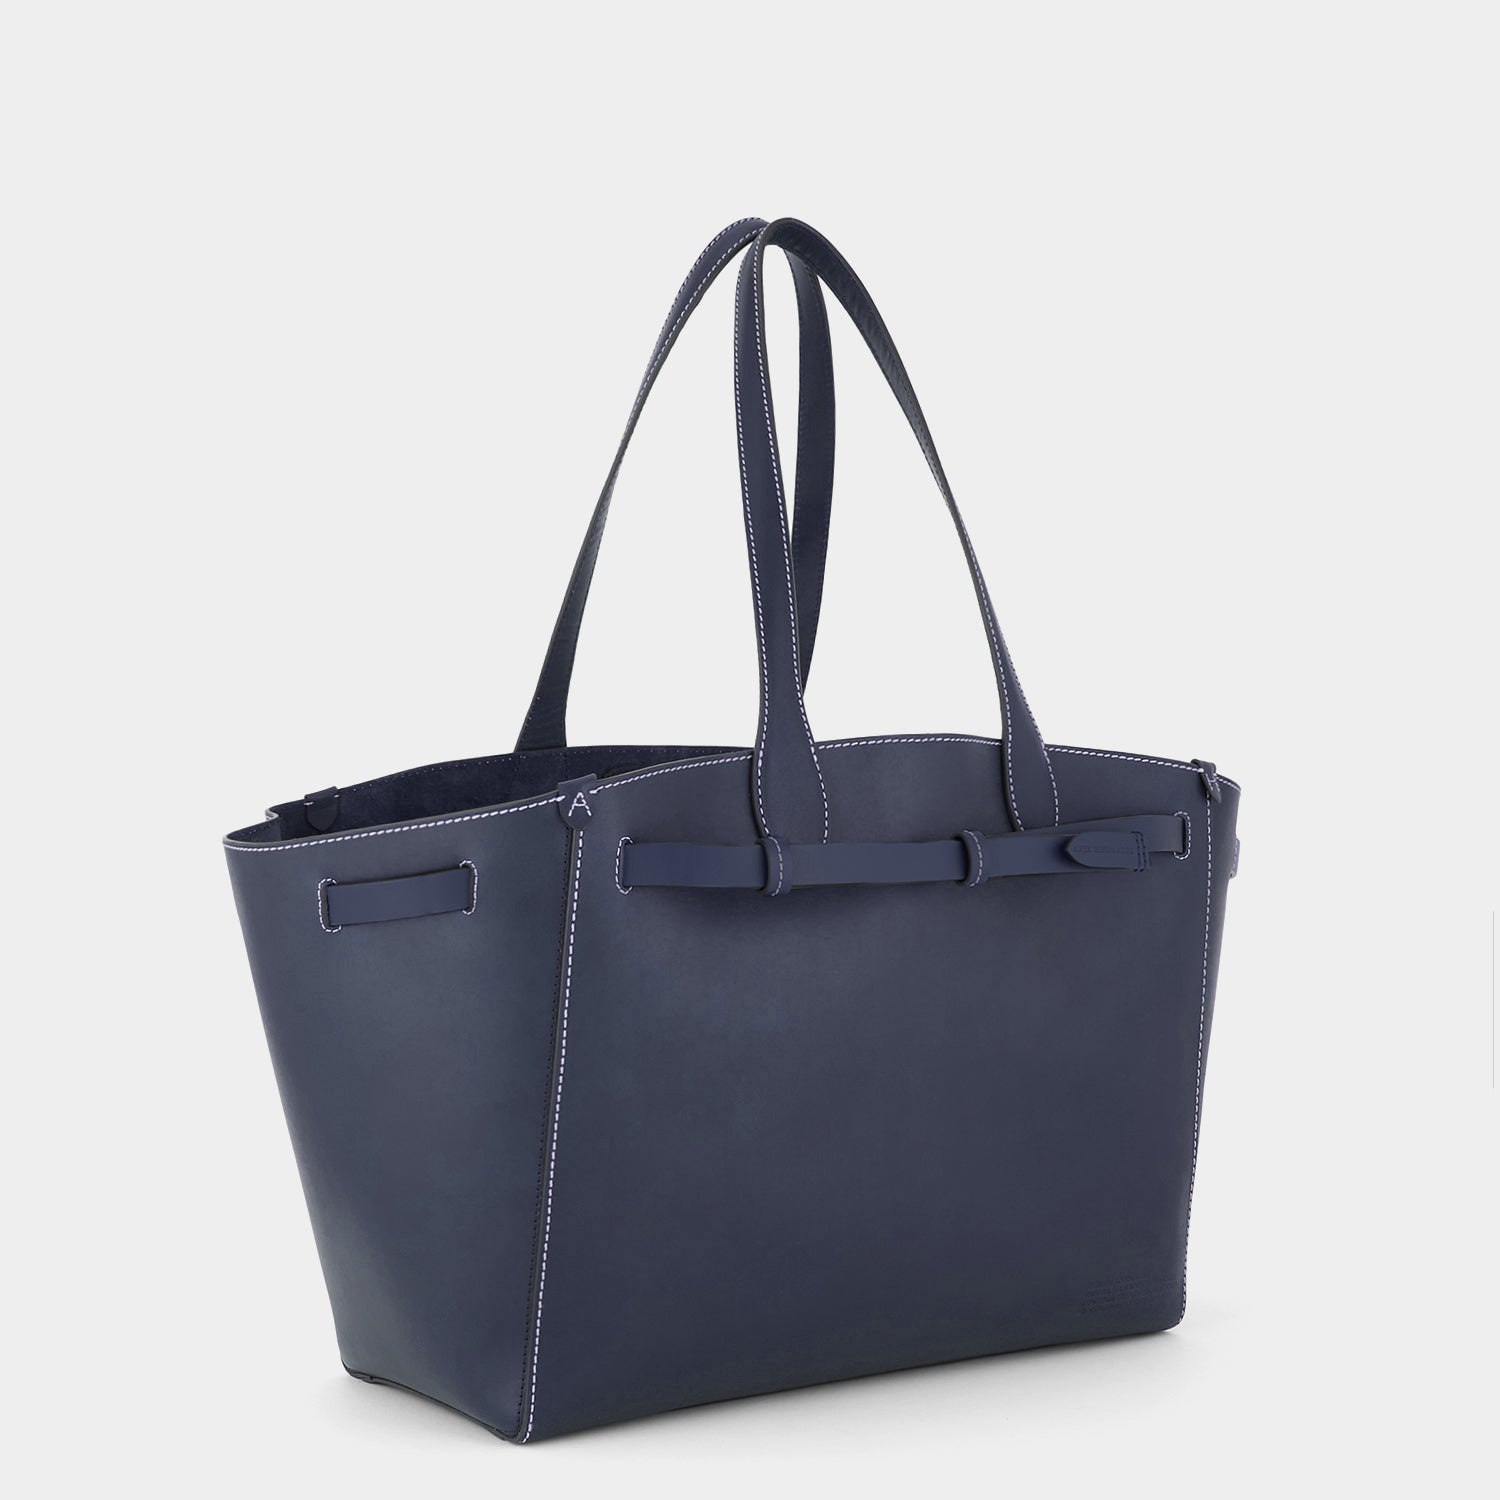 Return to Nature Tote -

                  
                    Compostable Leather in Marine -
                  

                  Anya Hindmarch EU
